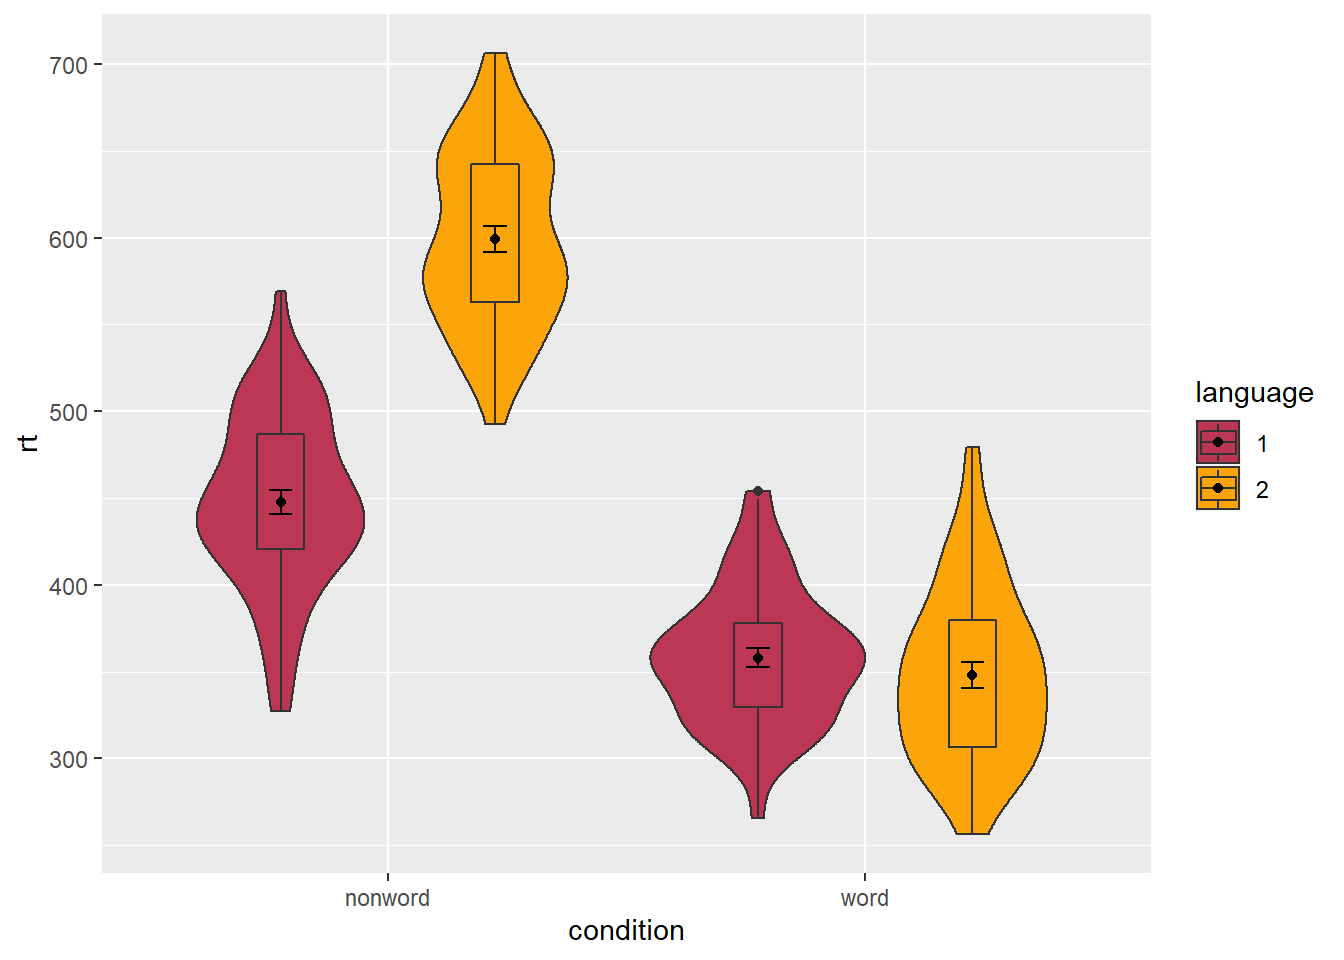 Grouped violin-boxplots with repositioning.